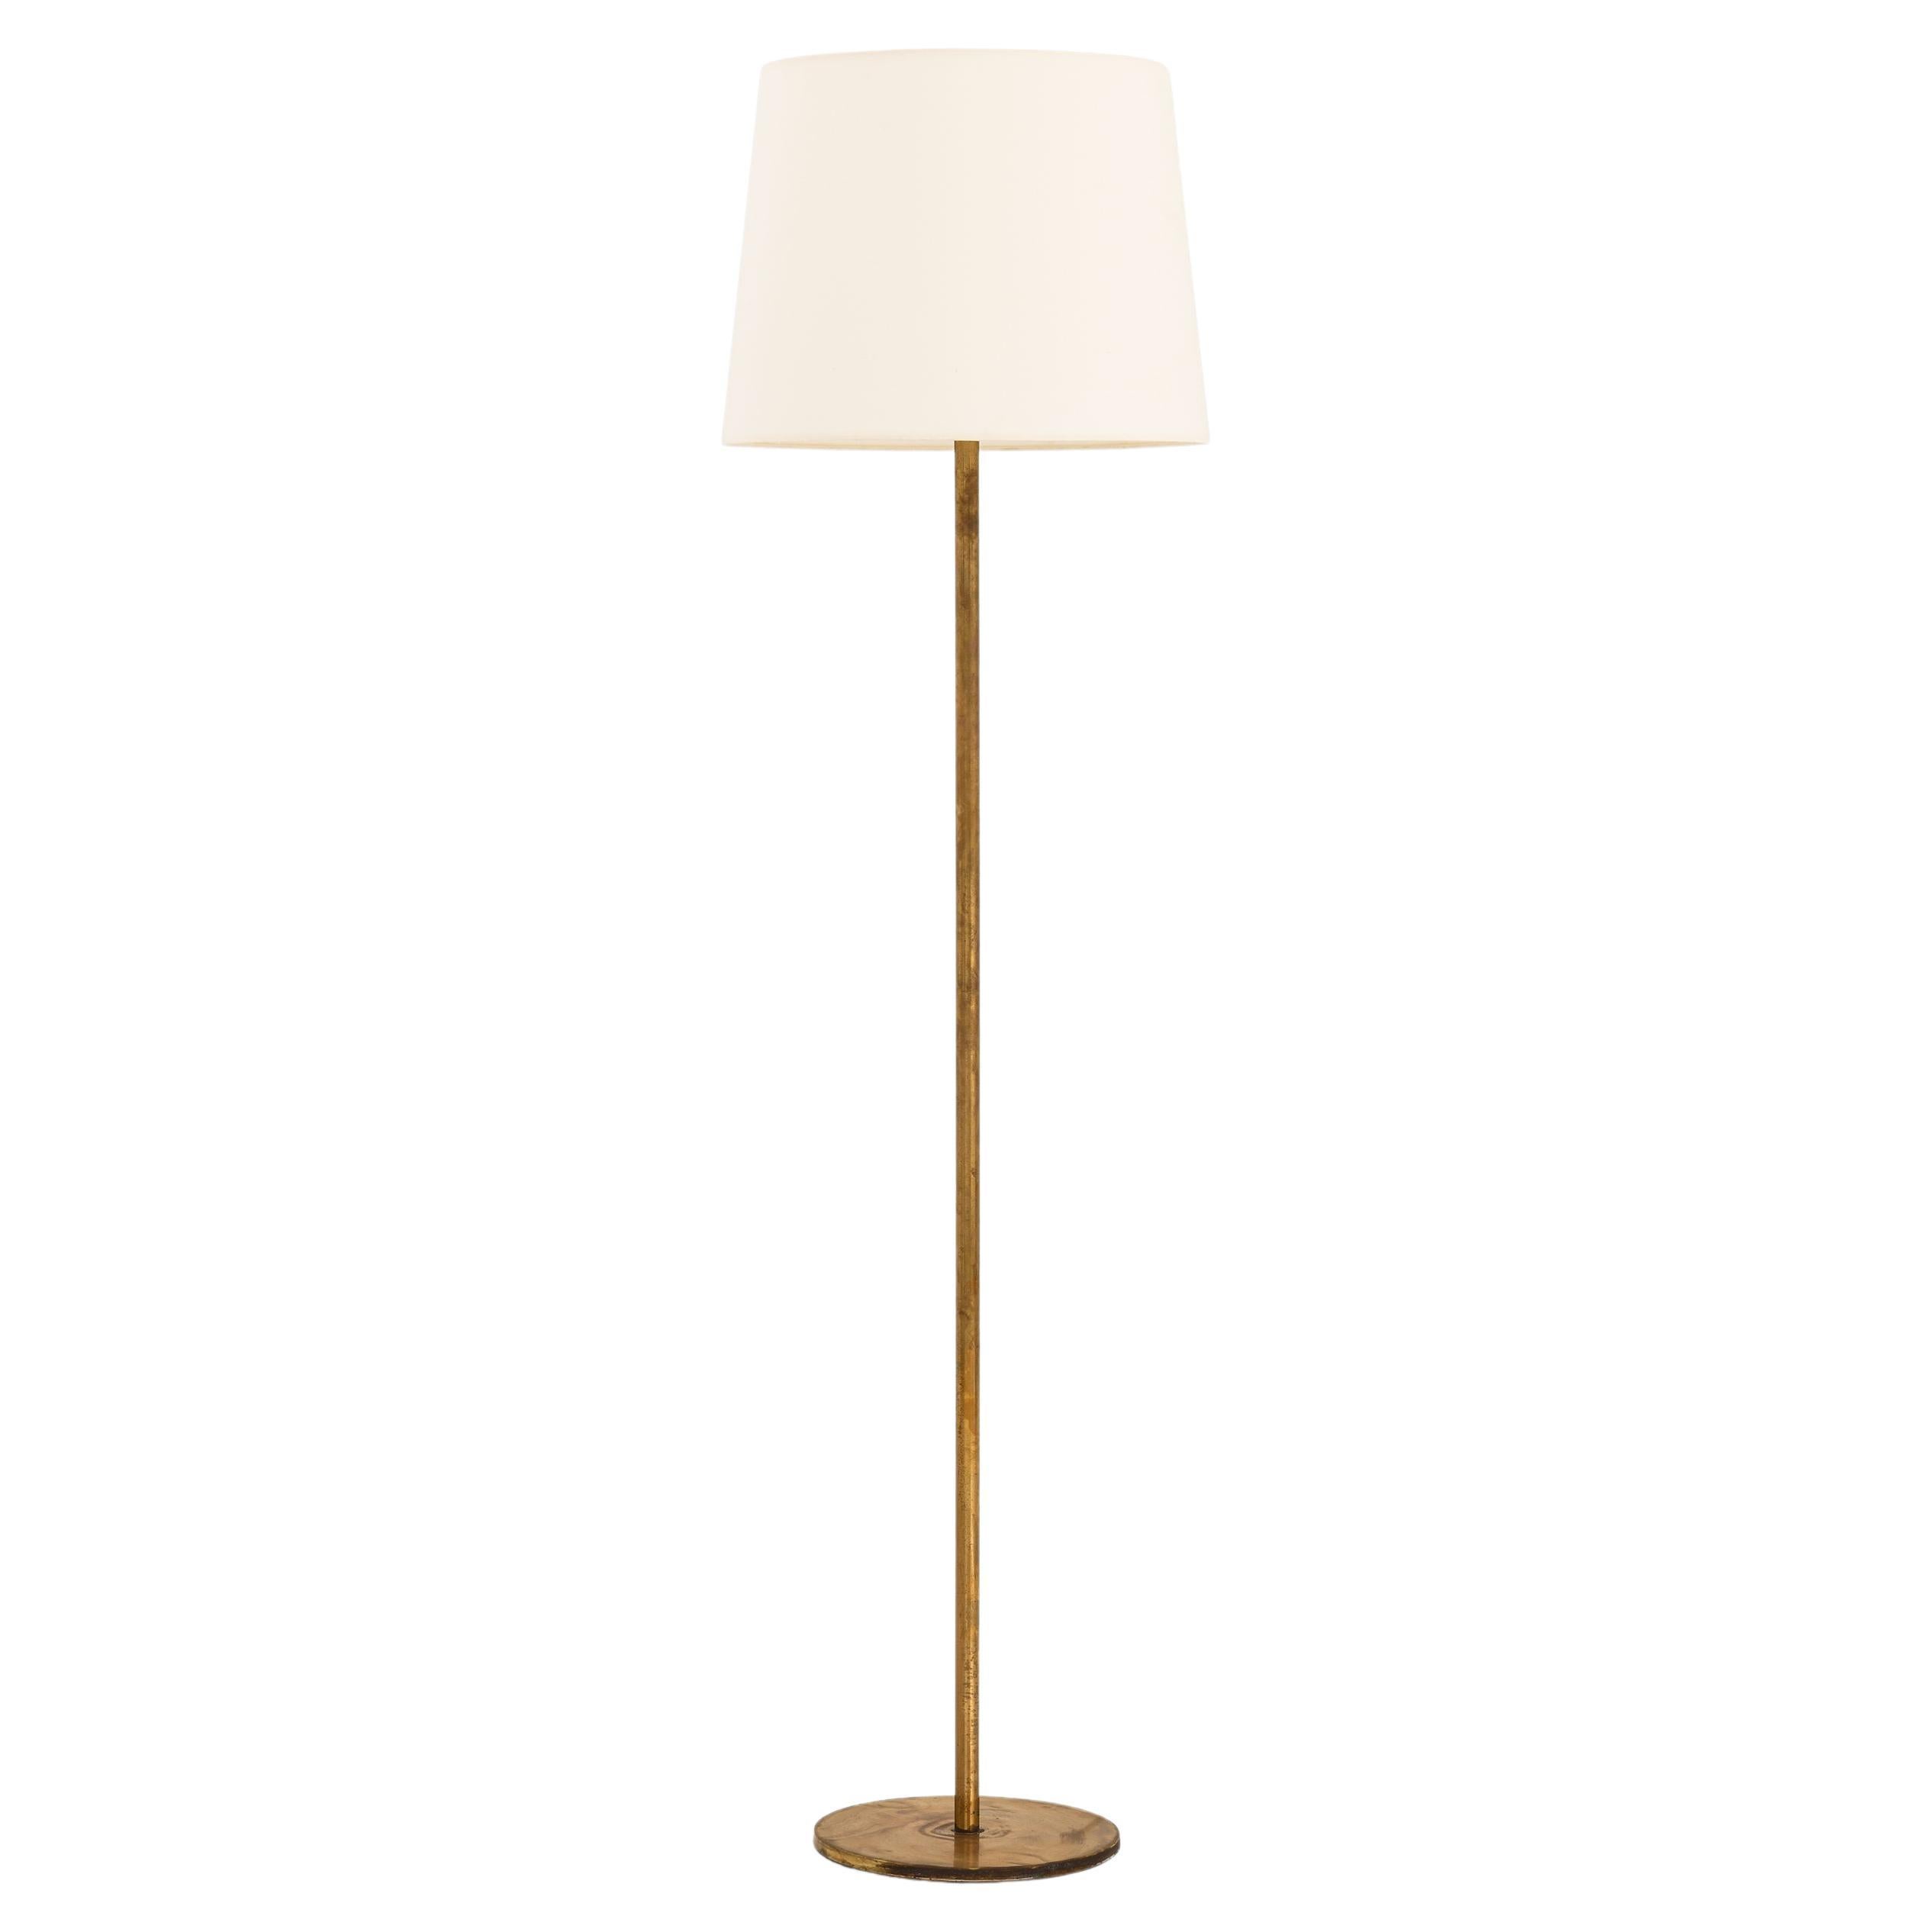 Floor Lamp in Brass, Plastic and Fabric by Uno and Östen Kristiansson, 1960's